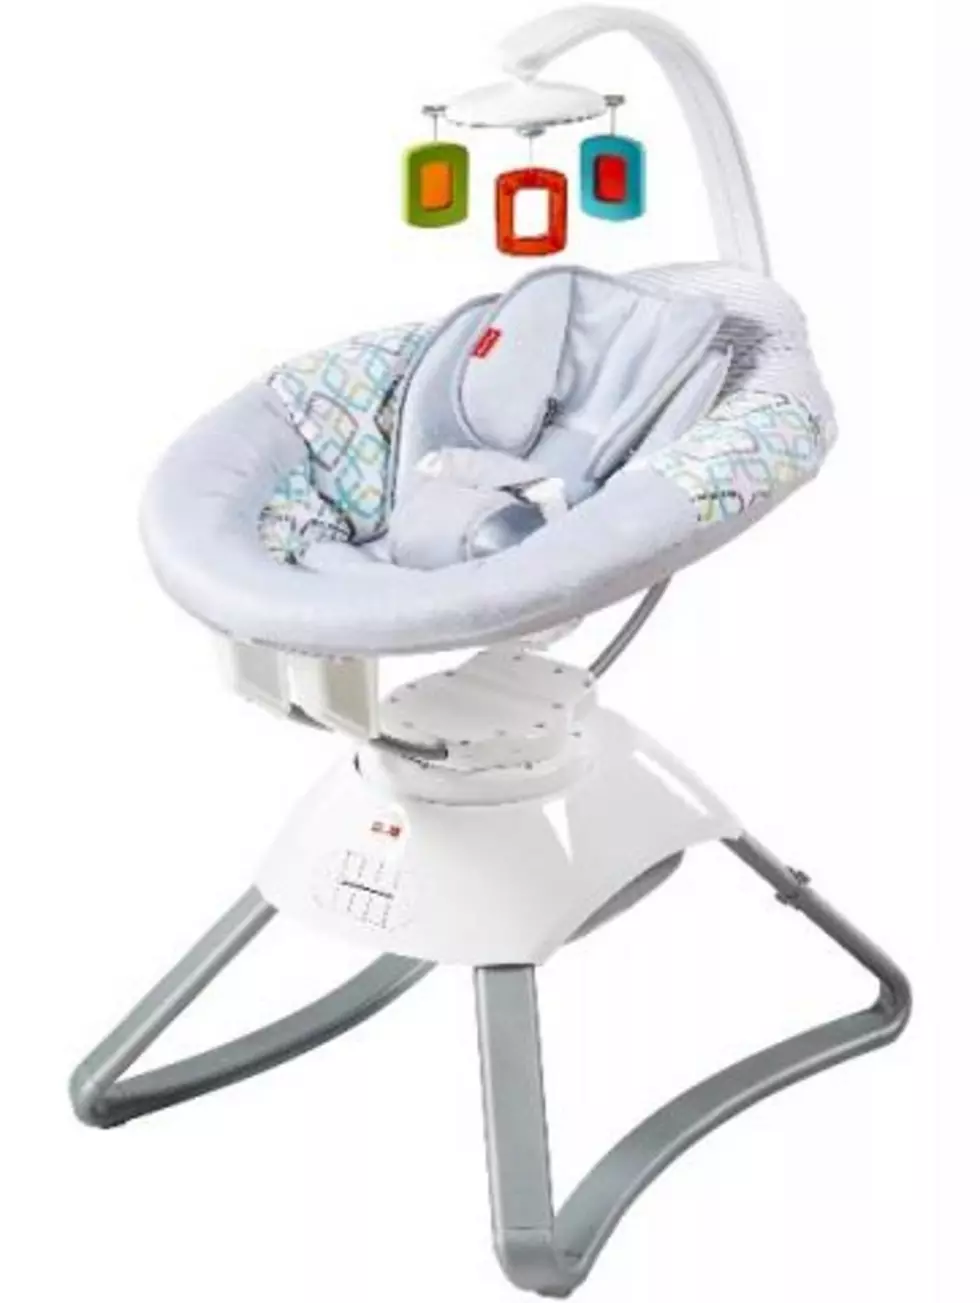 Fisher-Price Recalls Infant Seats Due to Fire Hazard